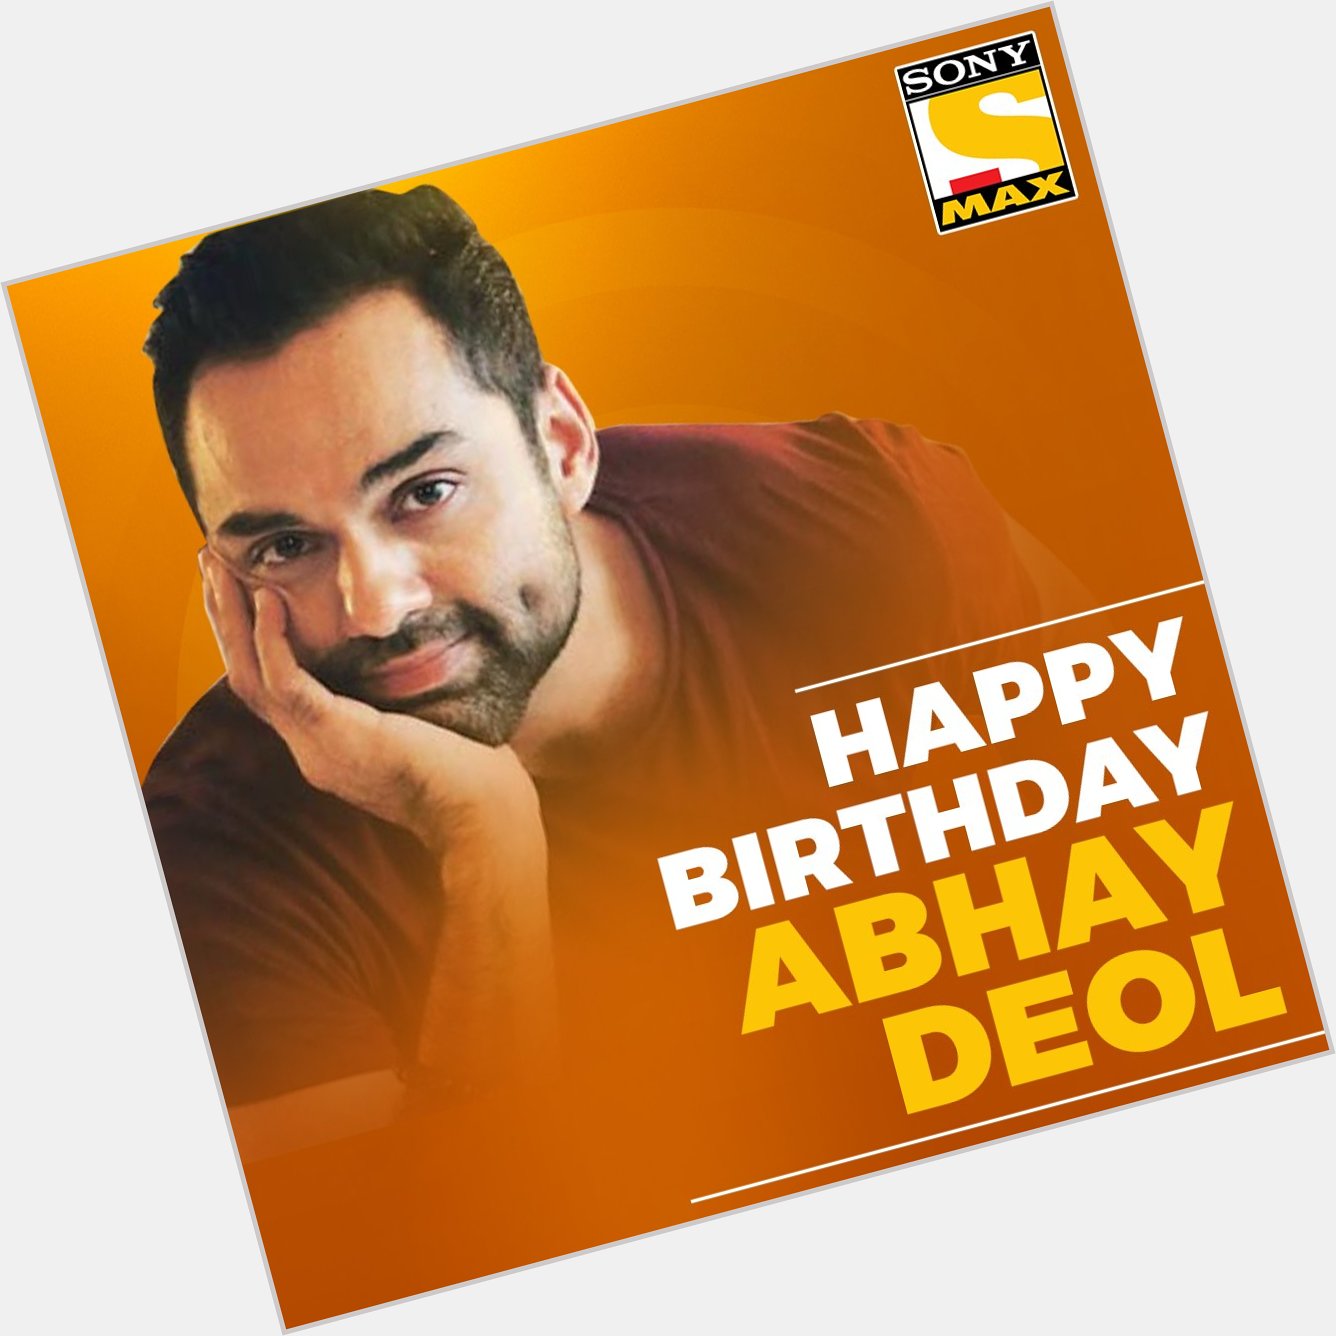 Wishing a very happy birthday to the very talented actor, Abhay Deol.   